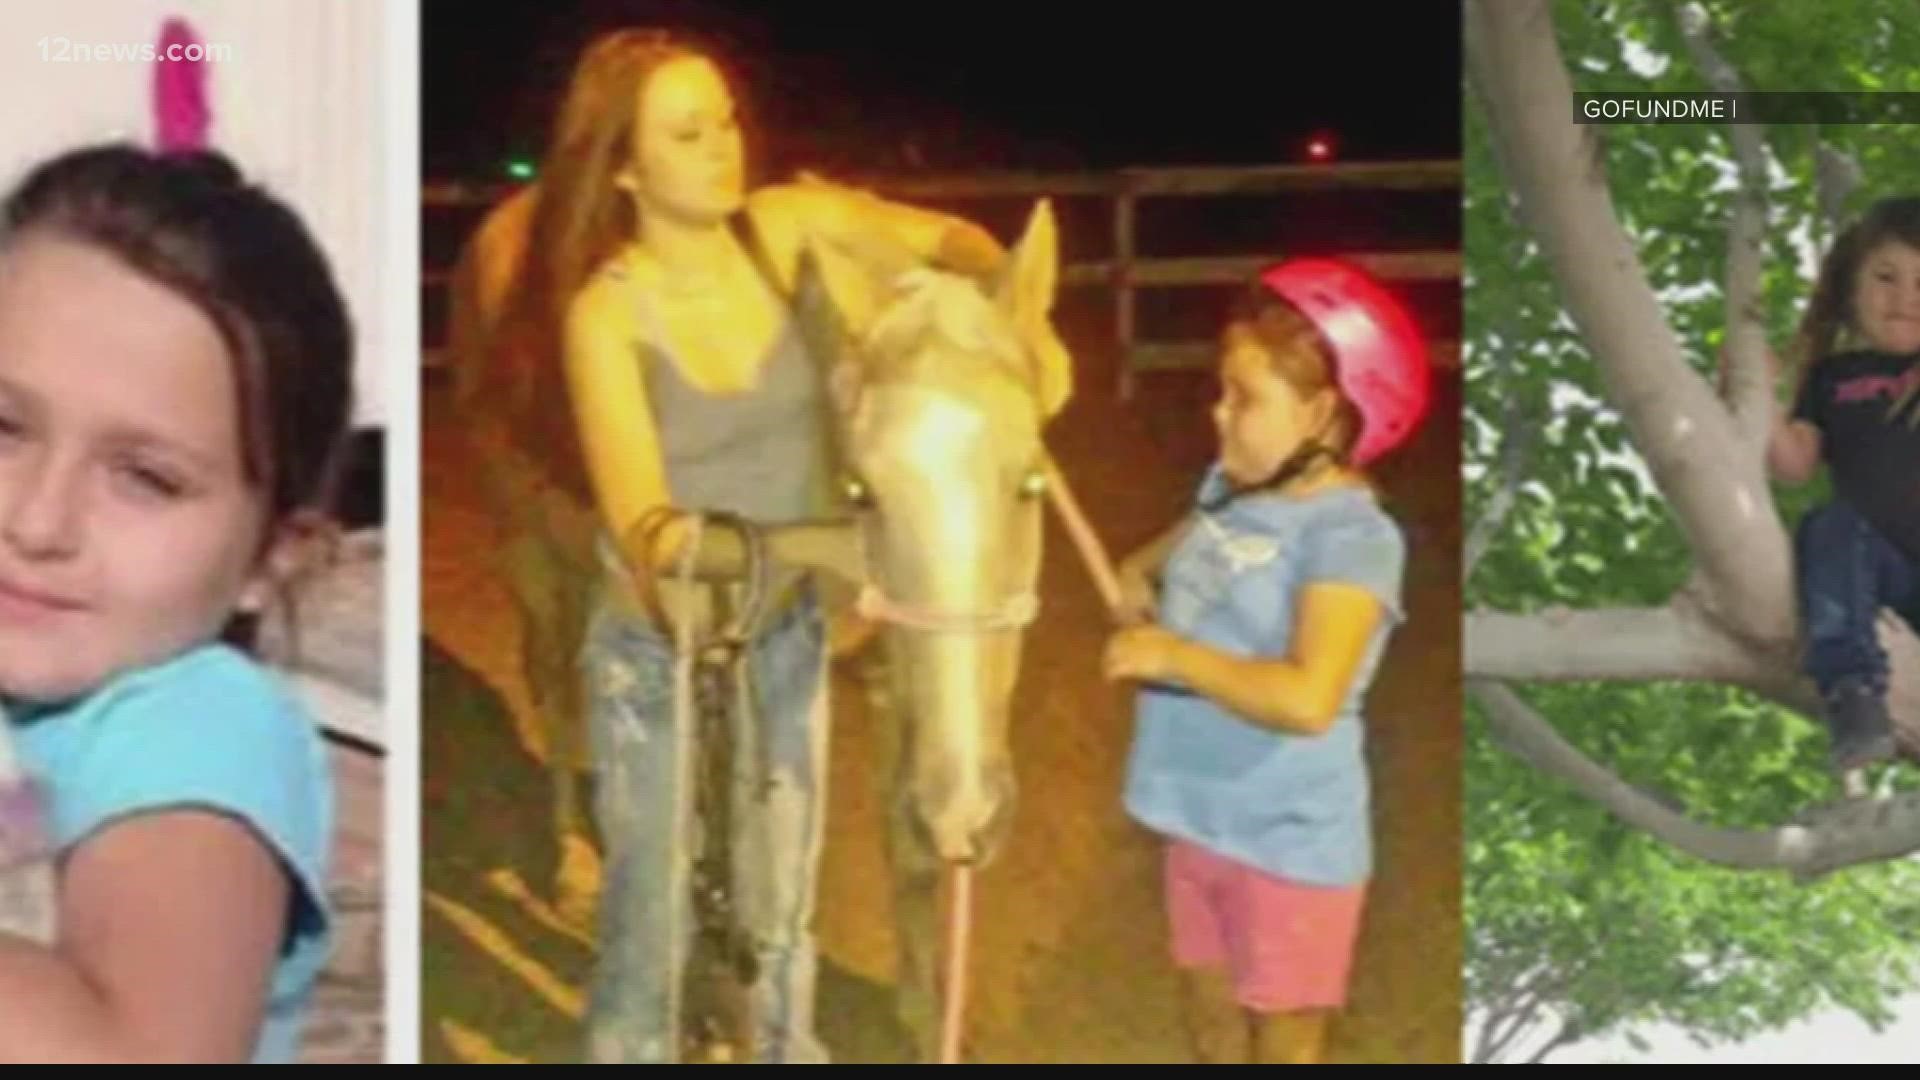 The girls’ family says their father shot them before turning the gun on himself.